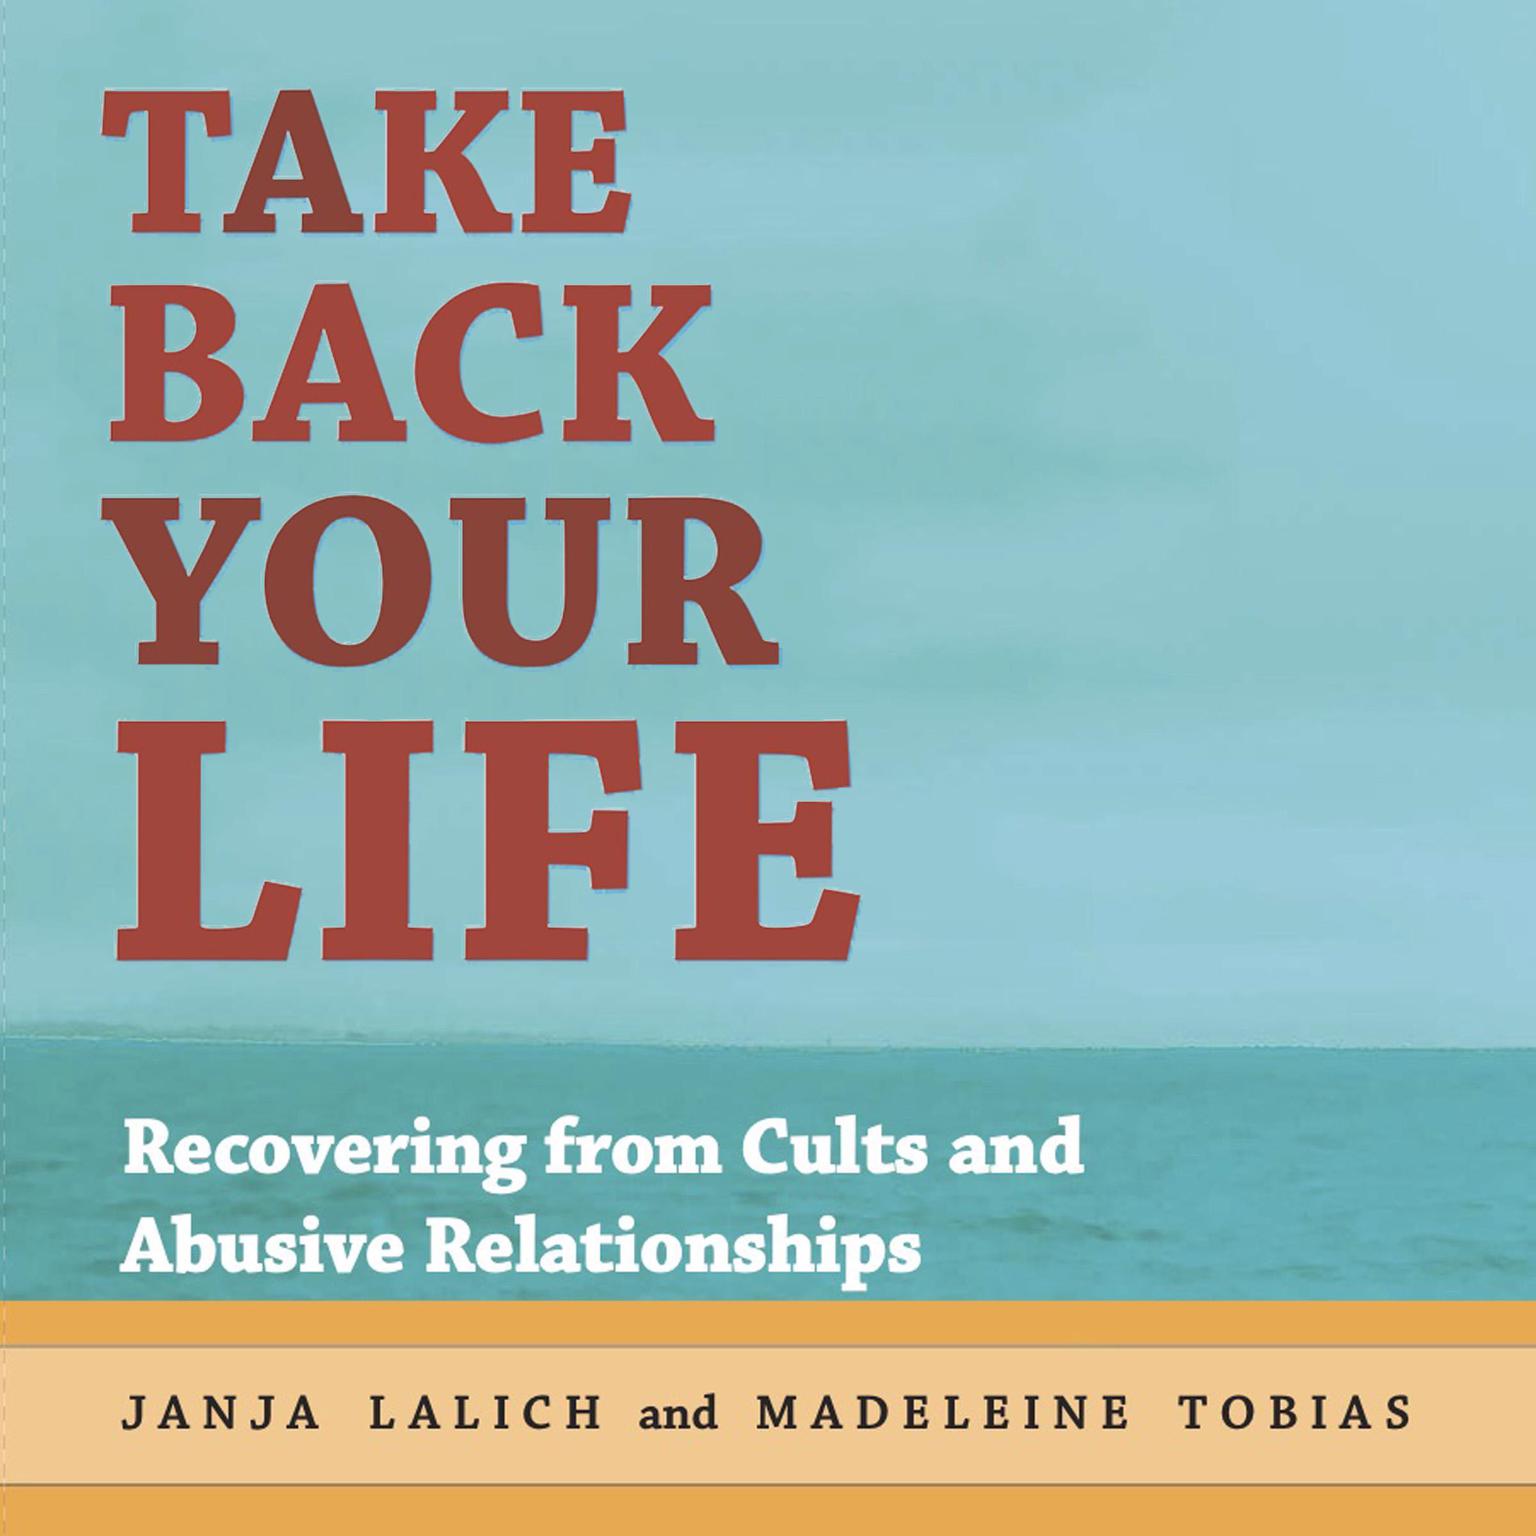 Take Back Your Life: Recovering from Cults and Abusive Relationships Audiobook, by Janja Lalich